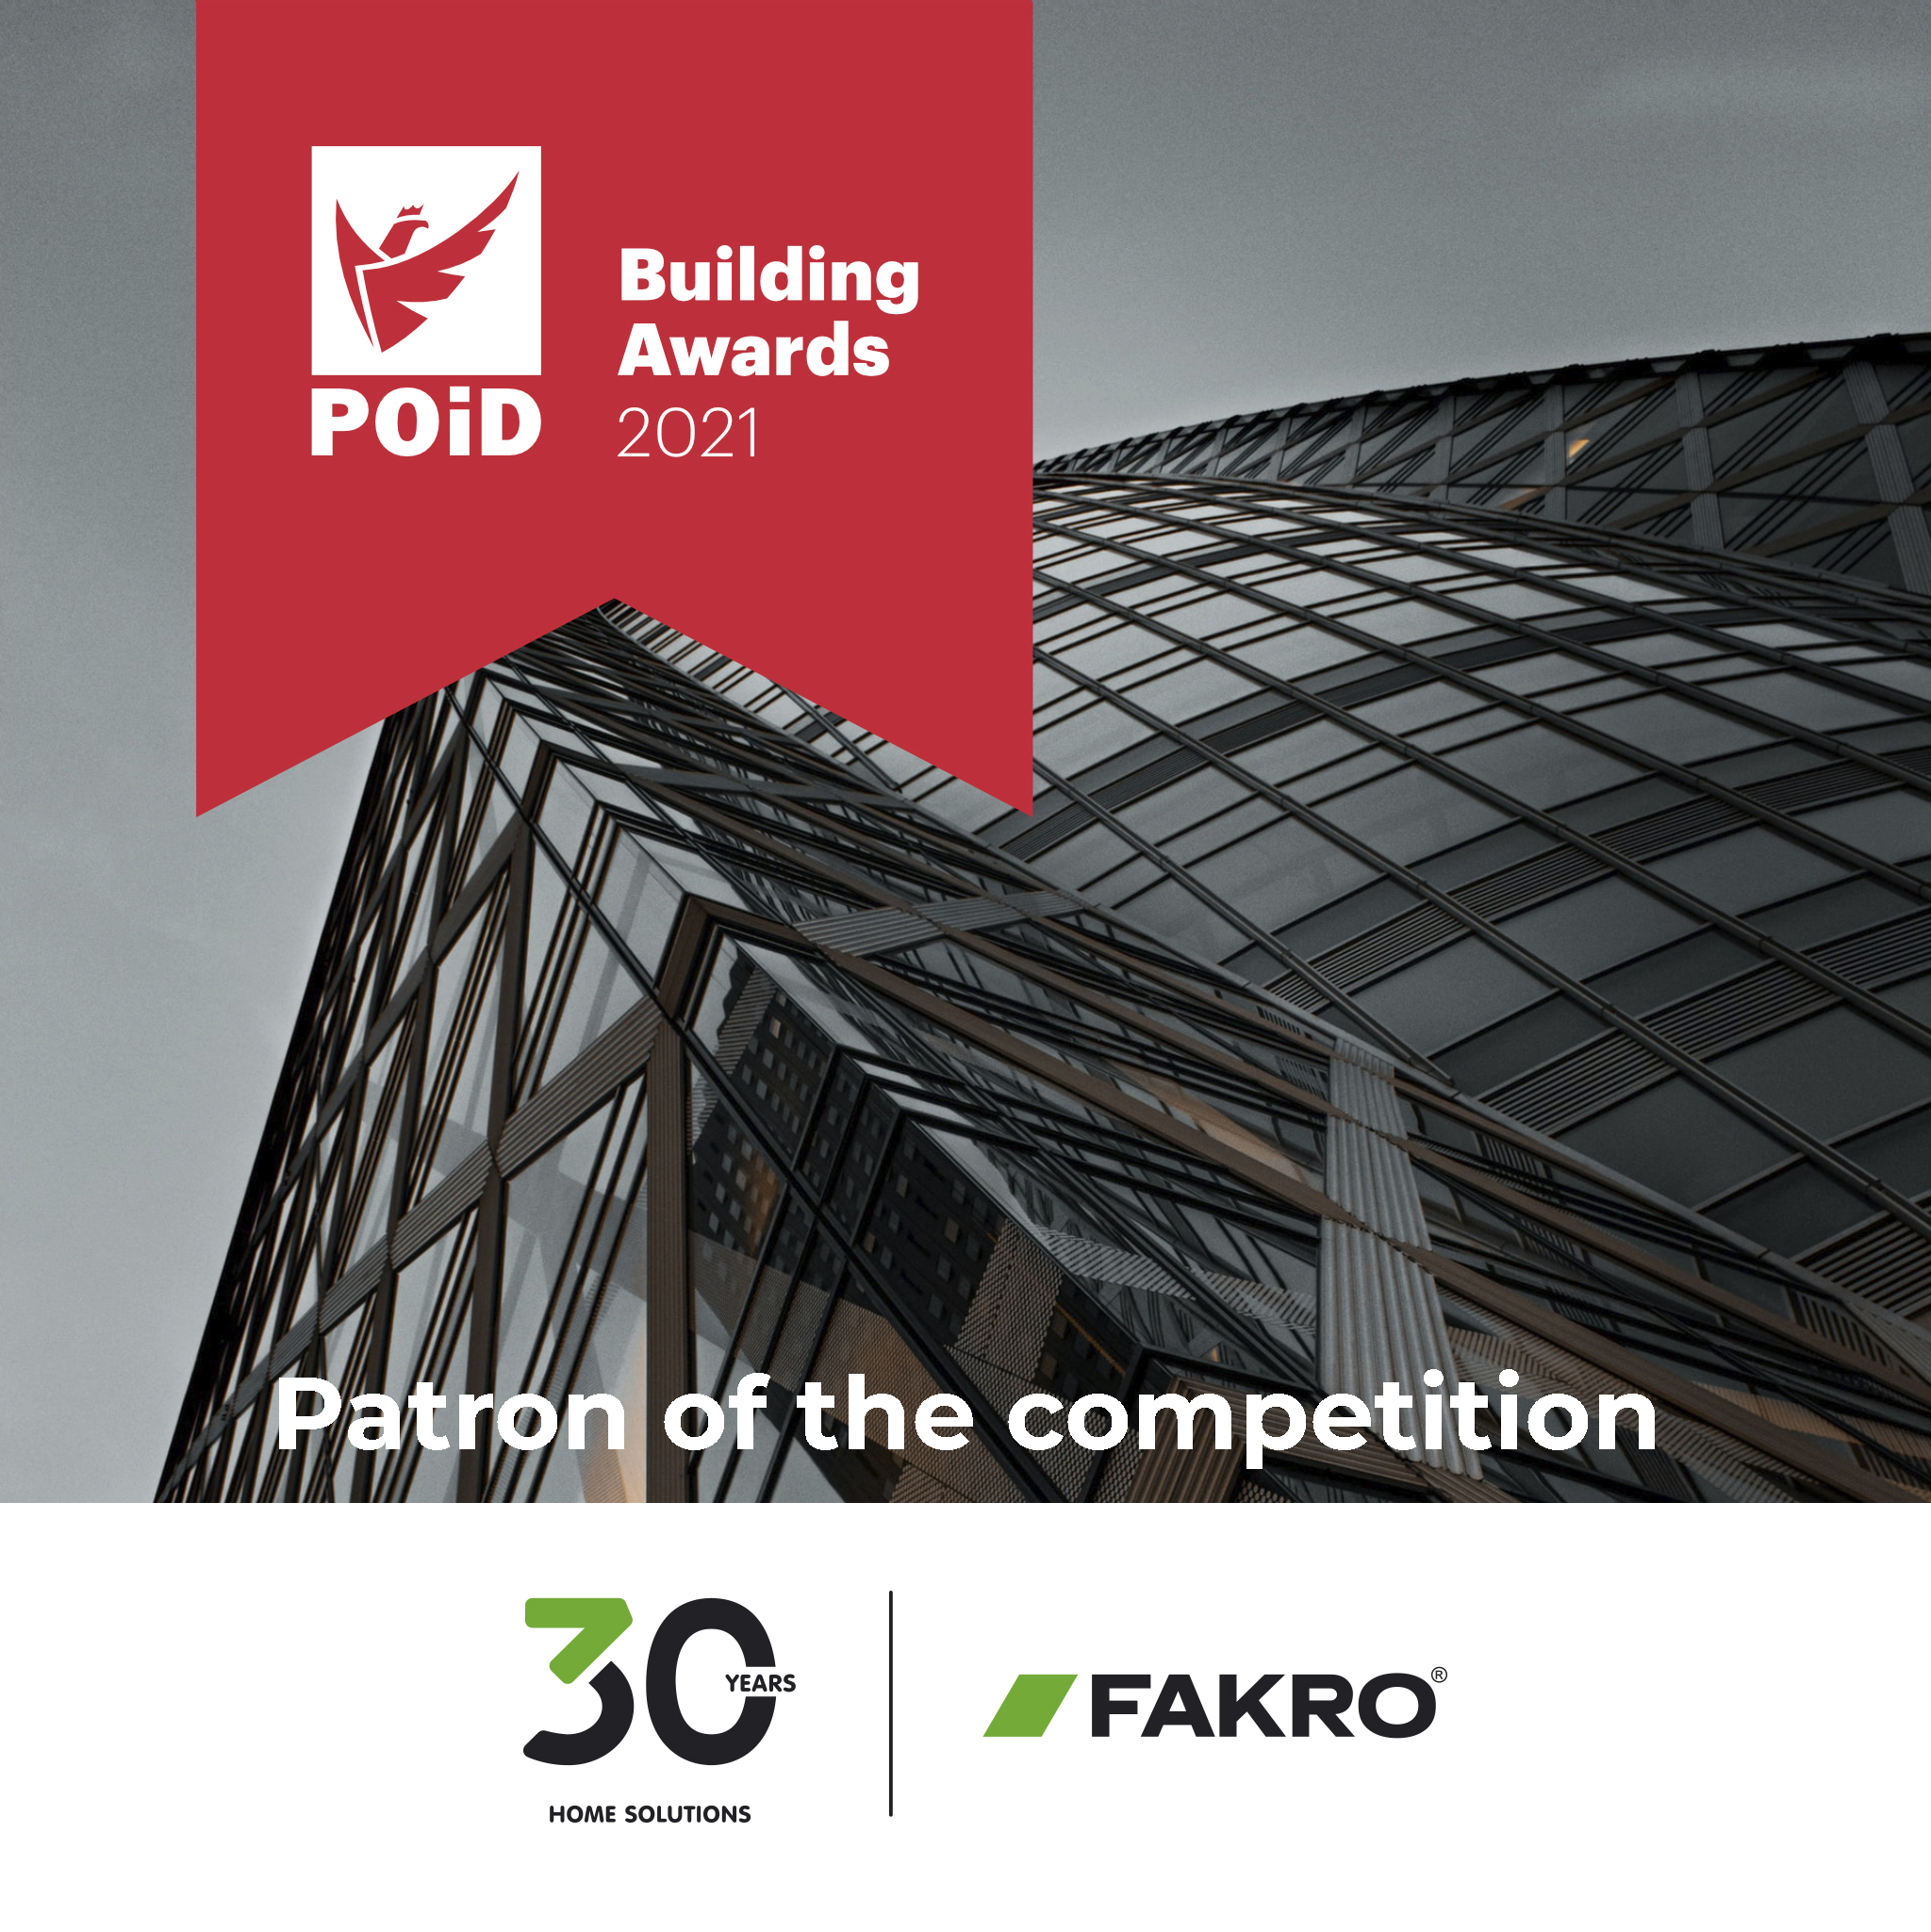 FAKRO among the patrons of the international POiD Building Awards 2021